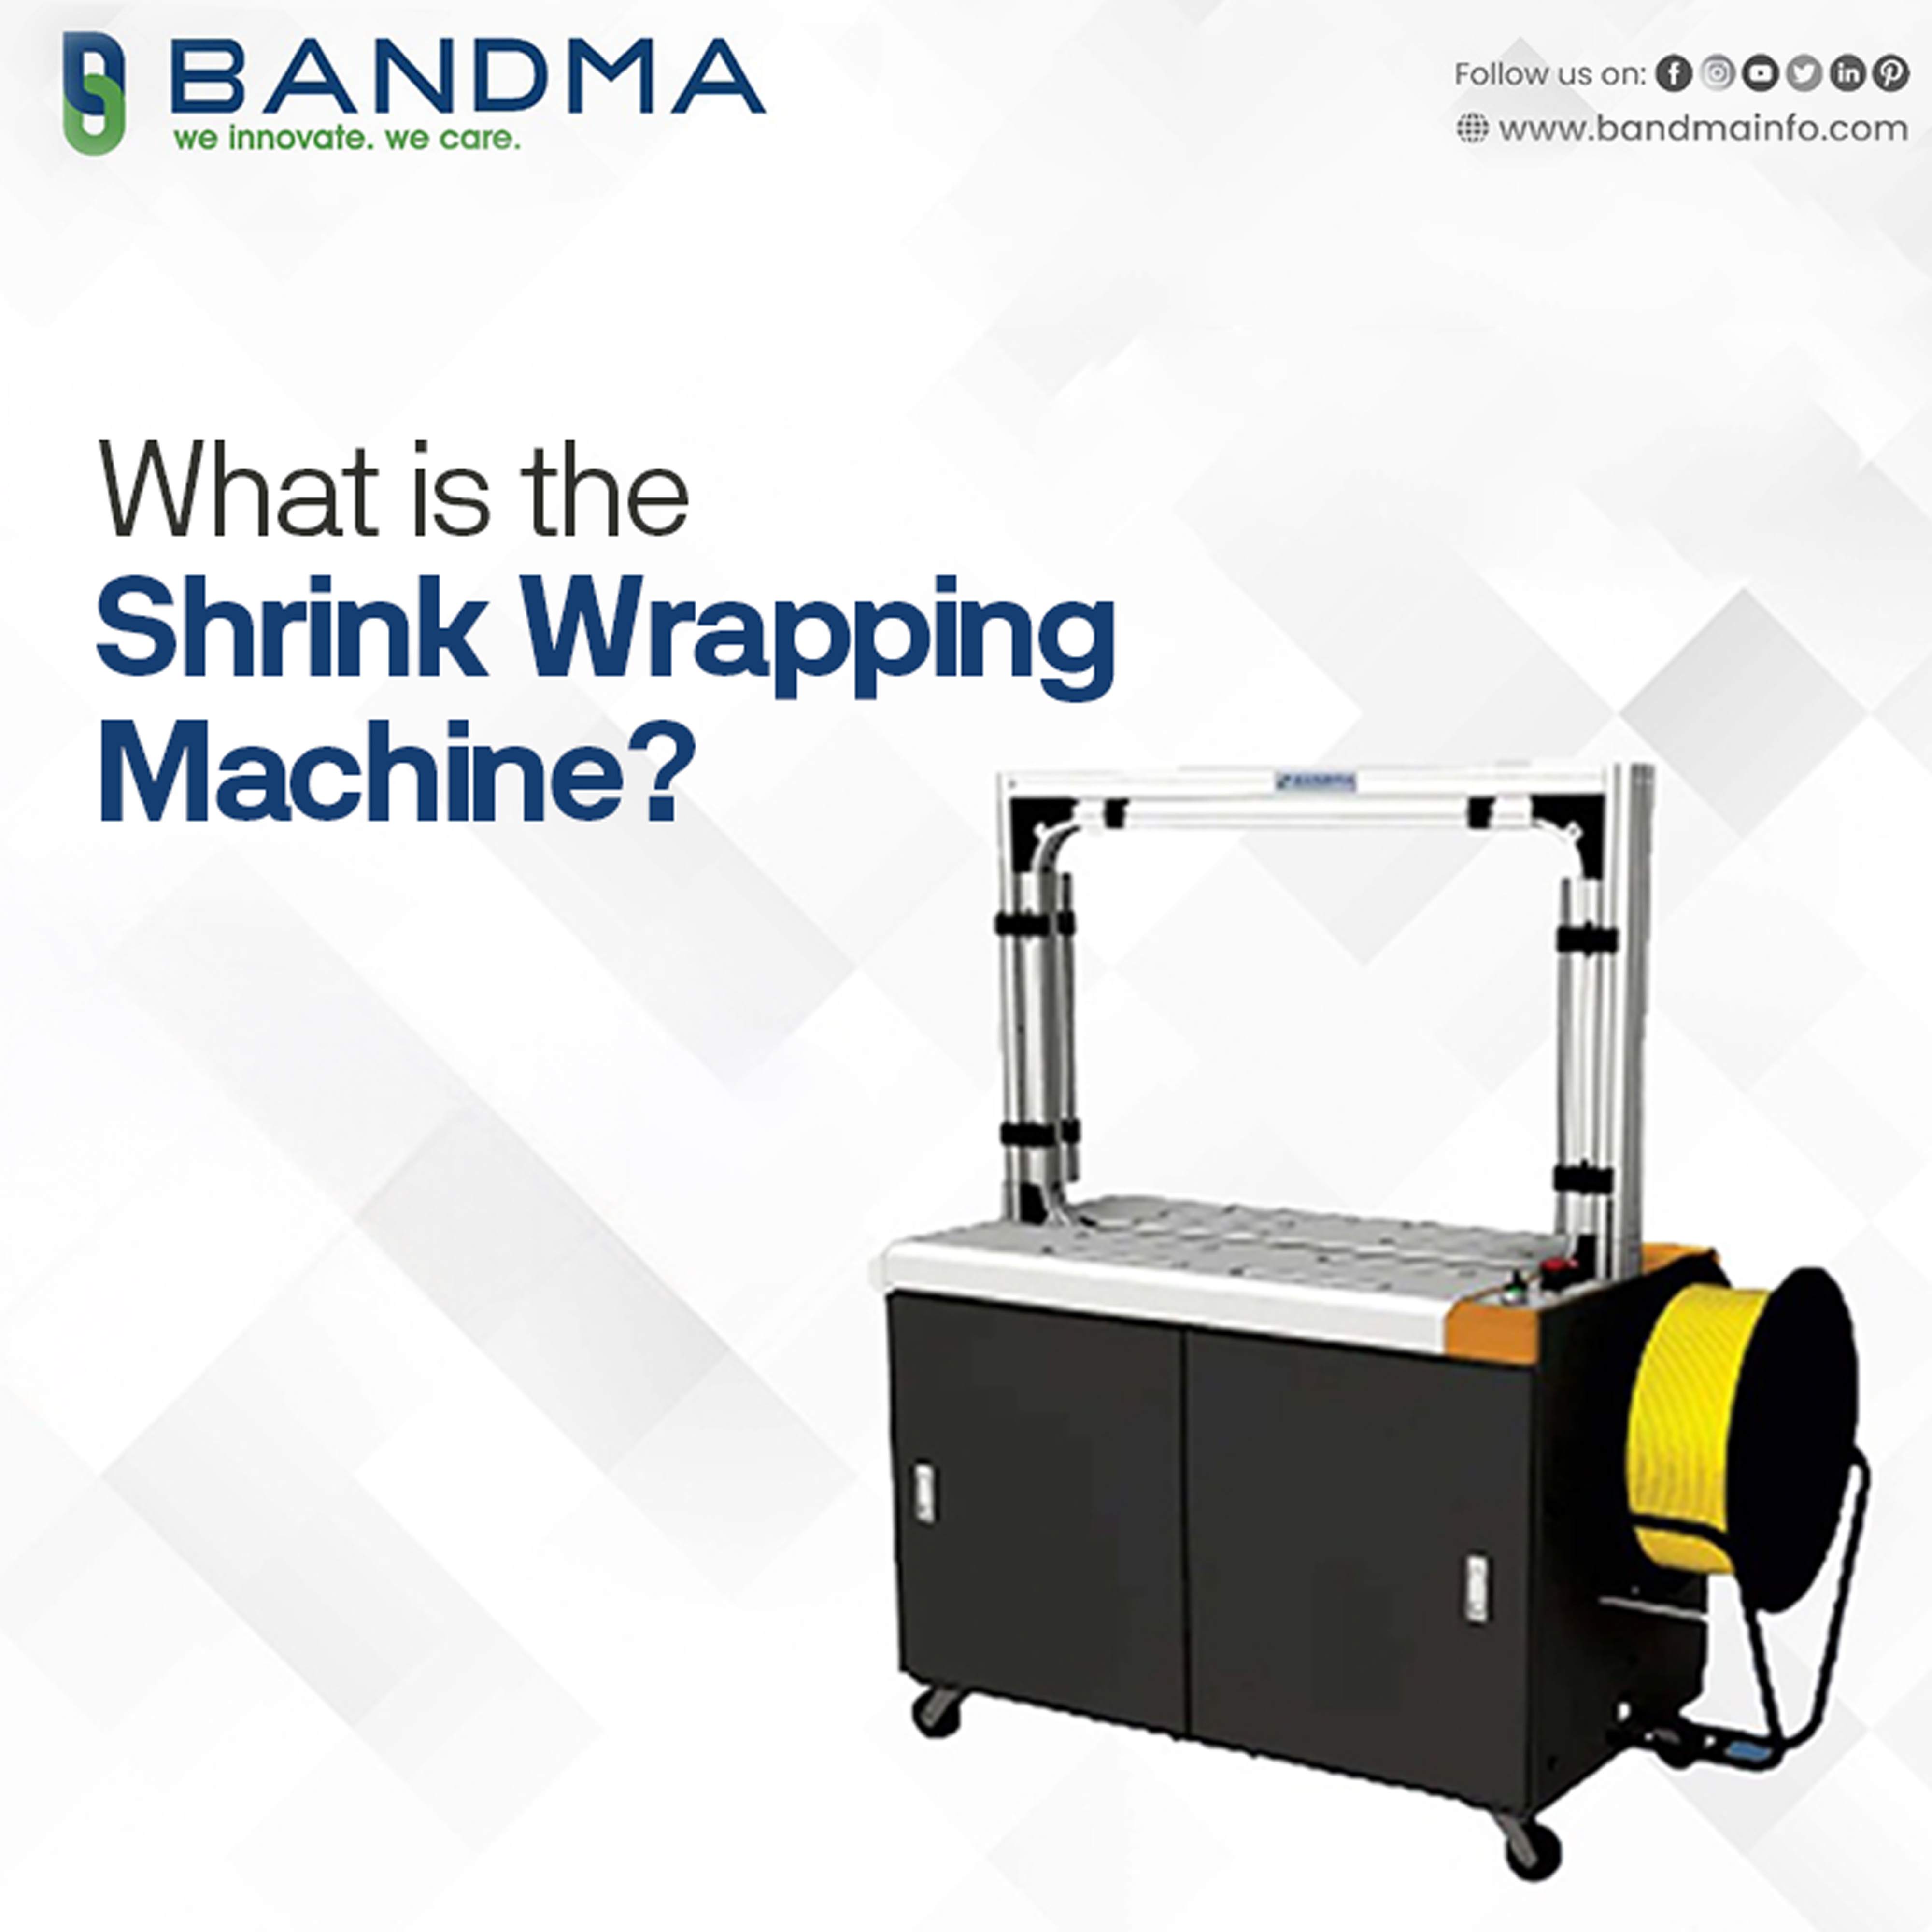 What is the Shrink Wrapping Machine?